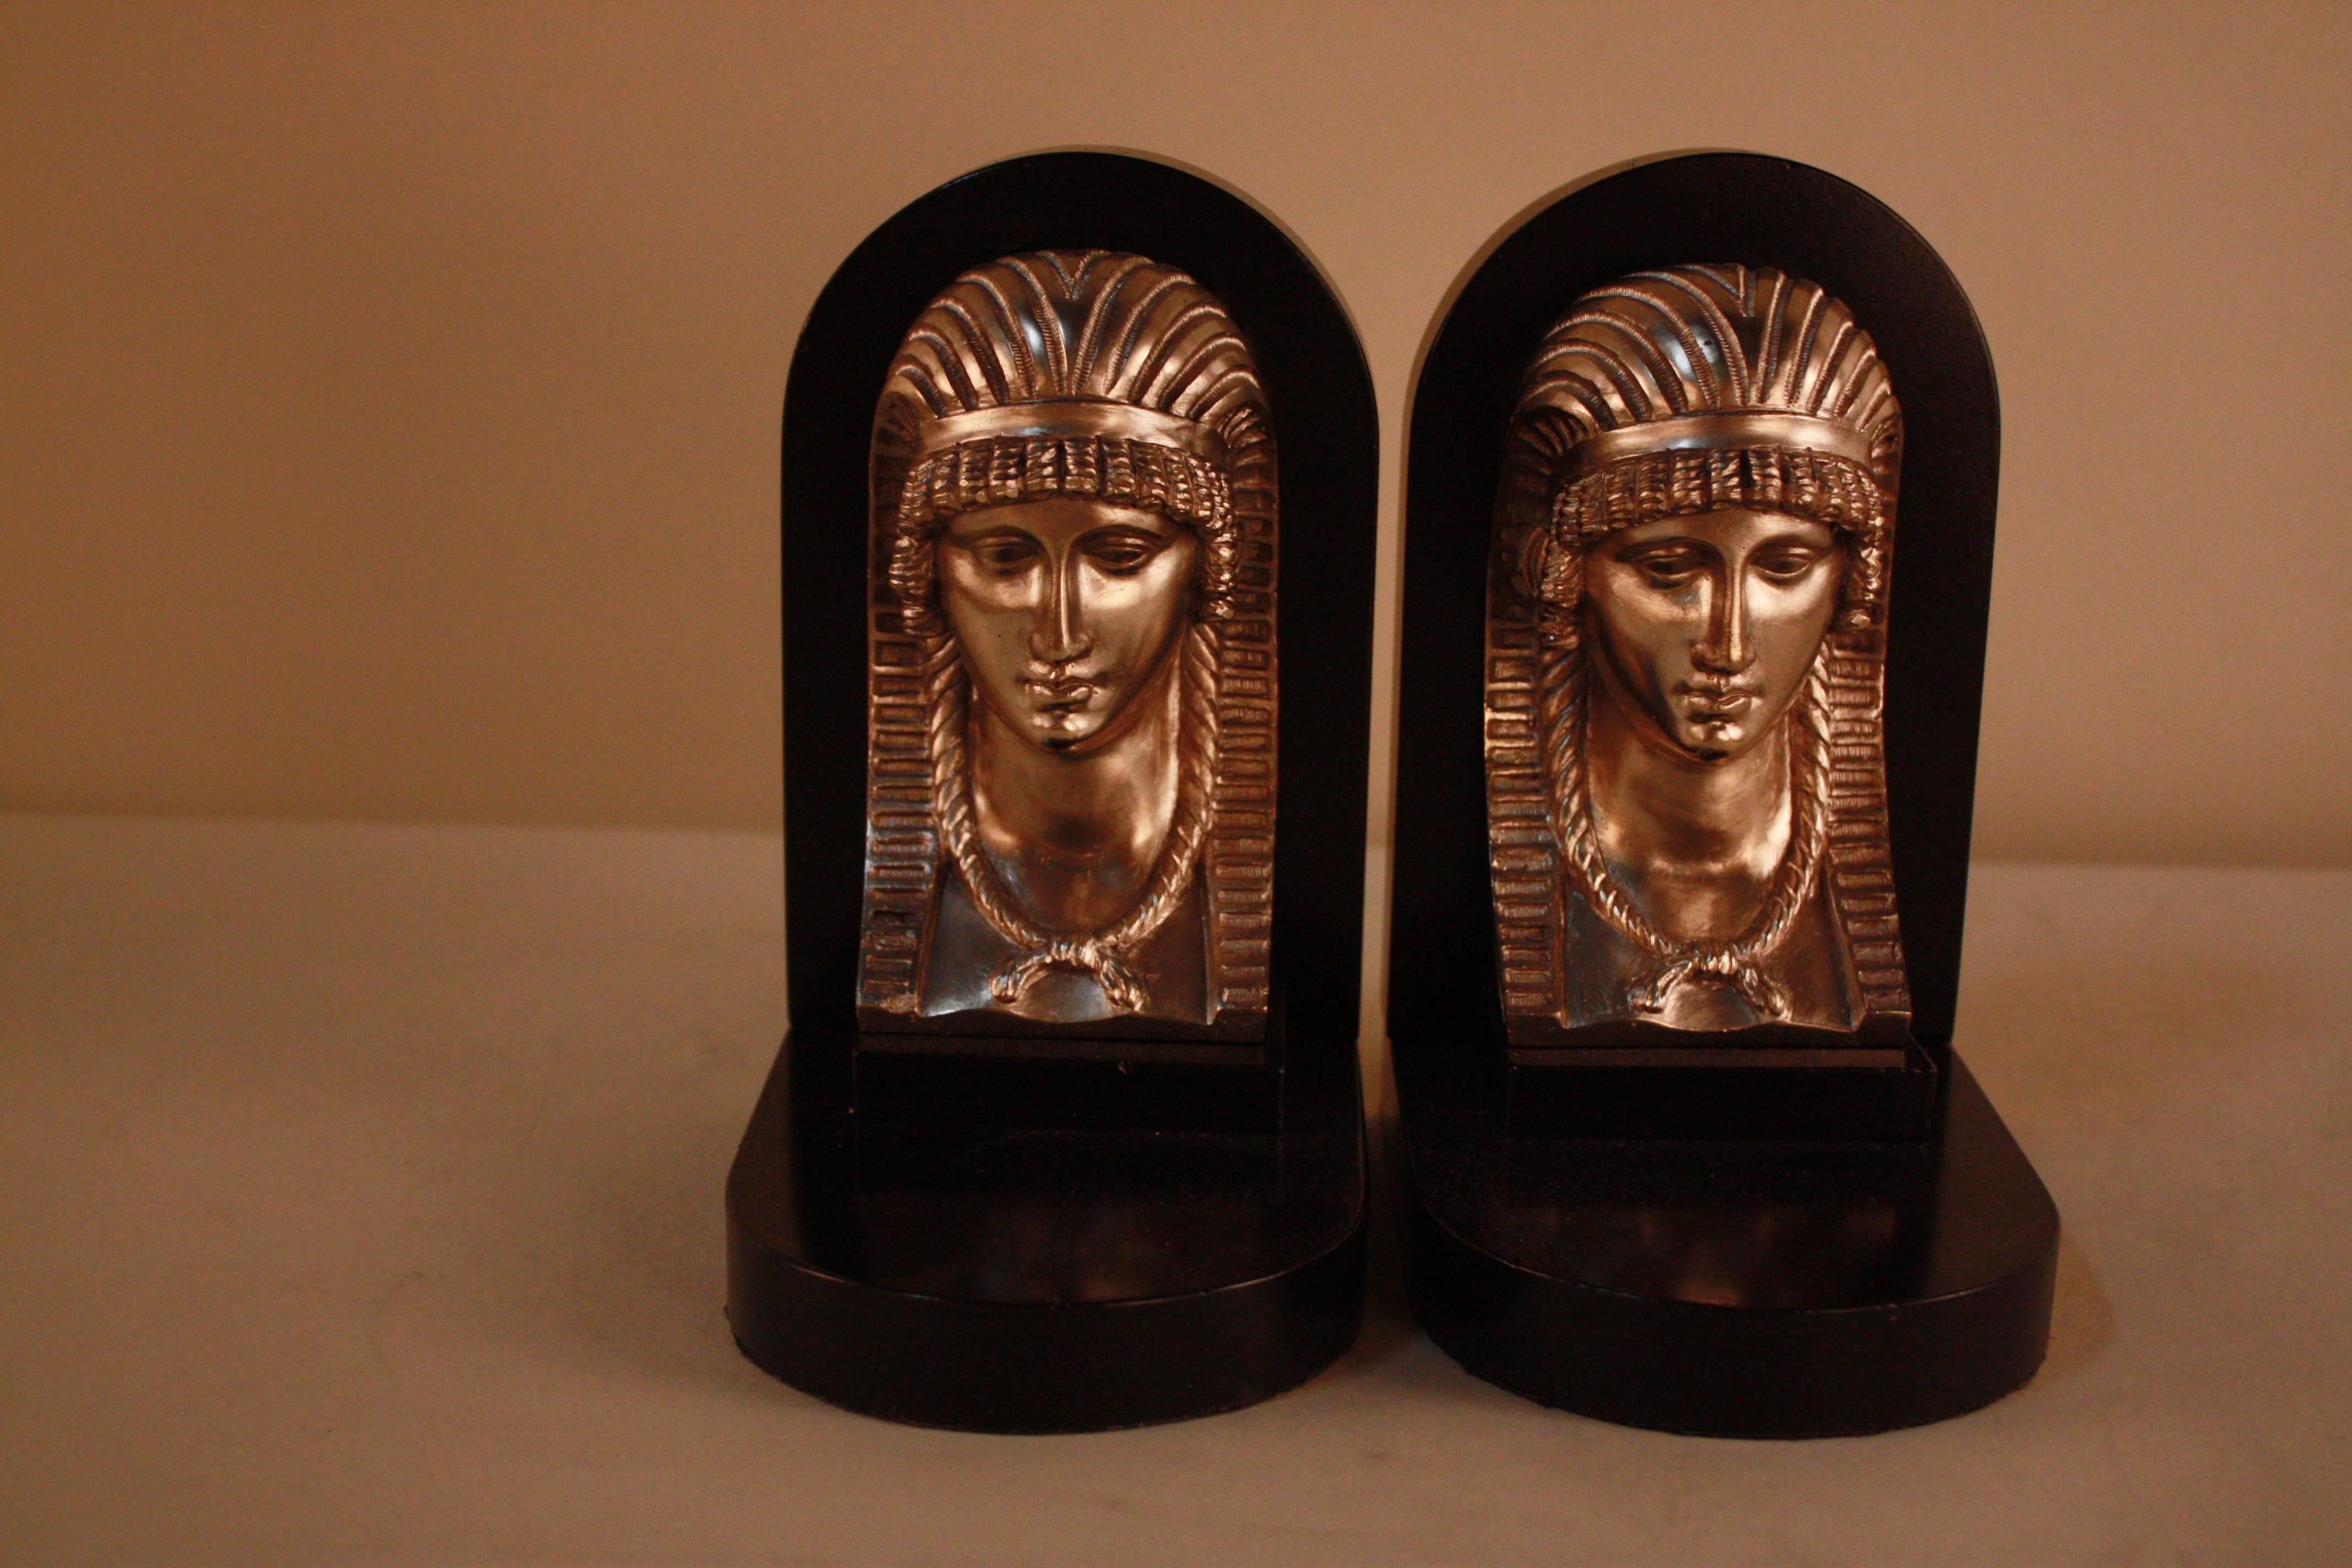 Pair of bookends with an Egyptian revival style, from the Art Deco period. Made of nickel on bronze, with lacquered marble for a sleek finish. 